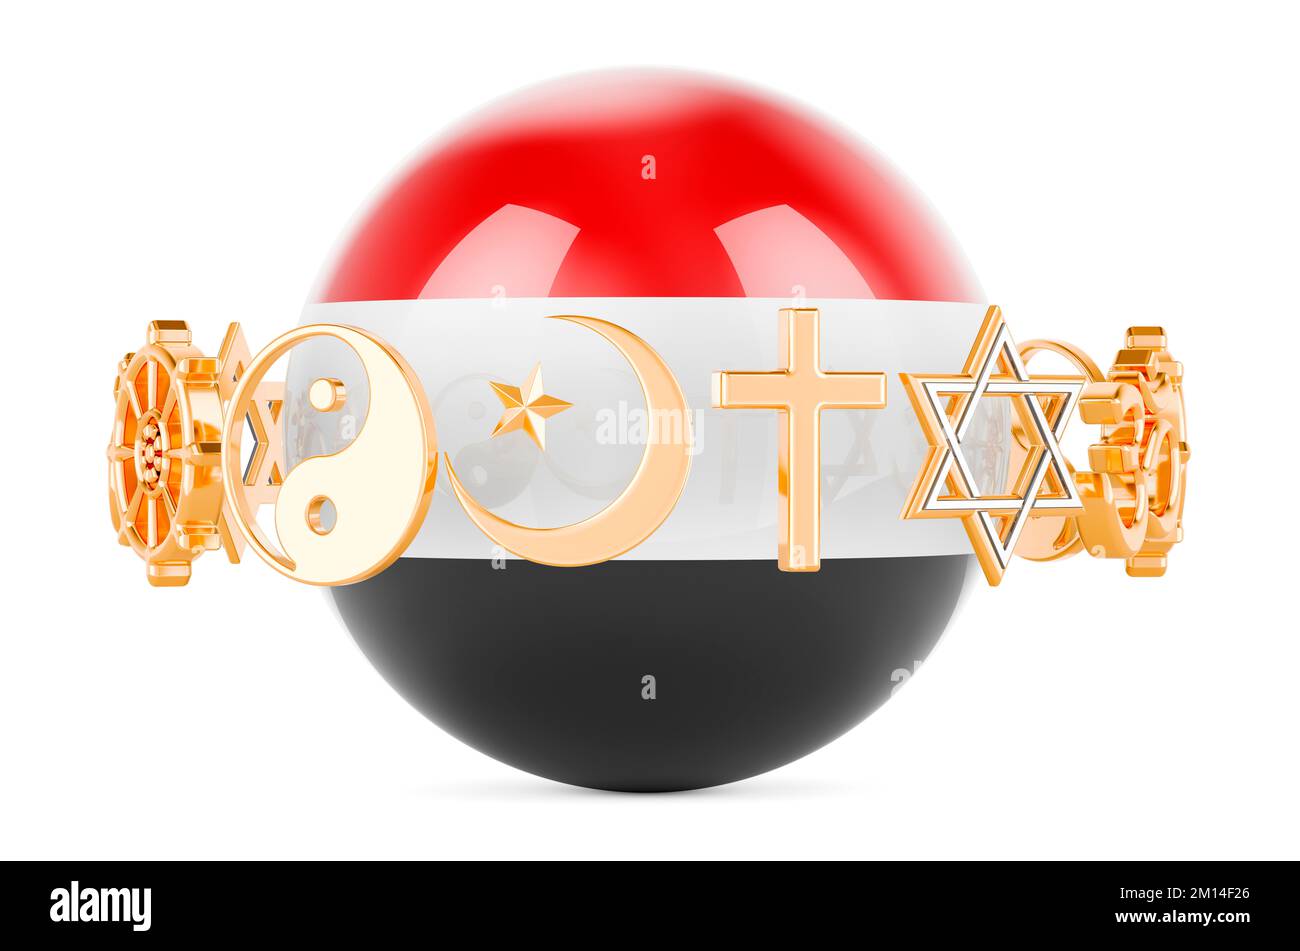 Yemeni flag painted on sphere with religions symbols around, 3D rendering isolated on white background Stock Photo